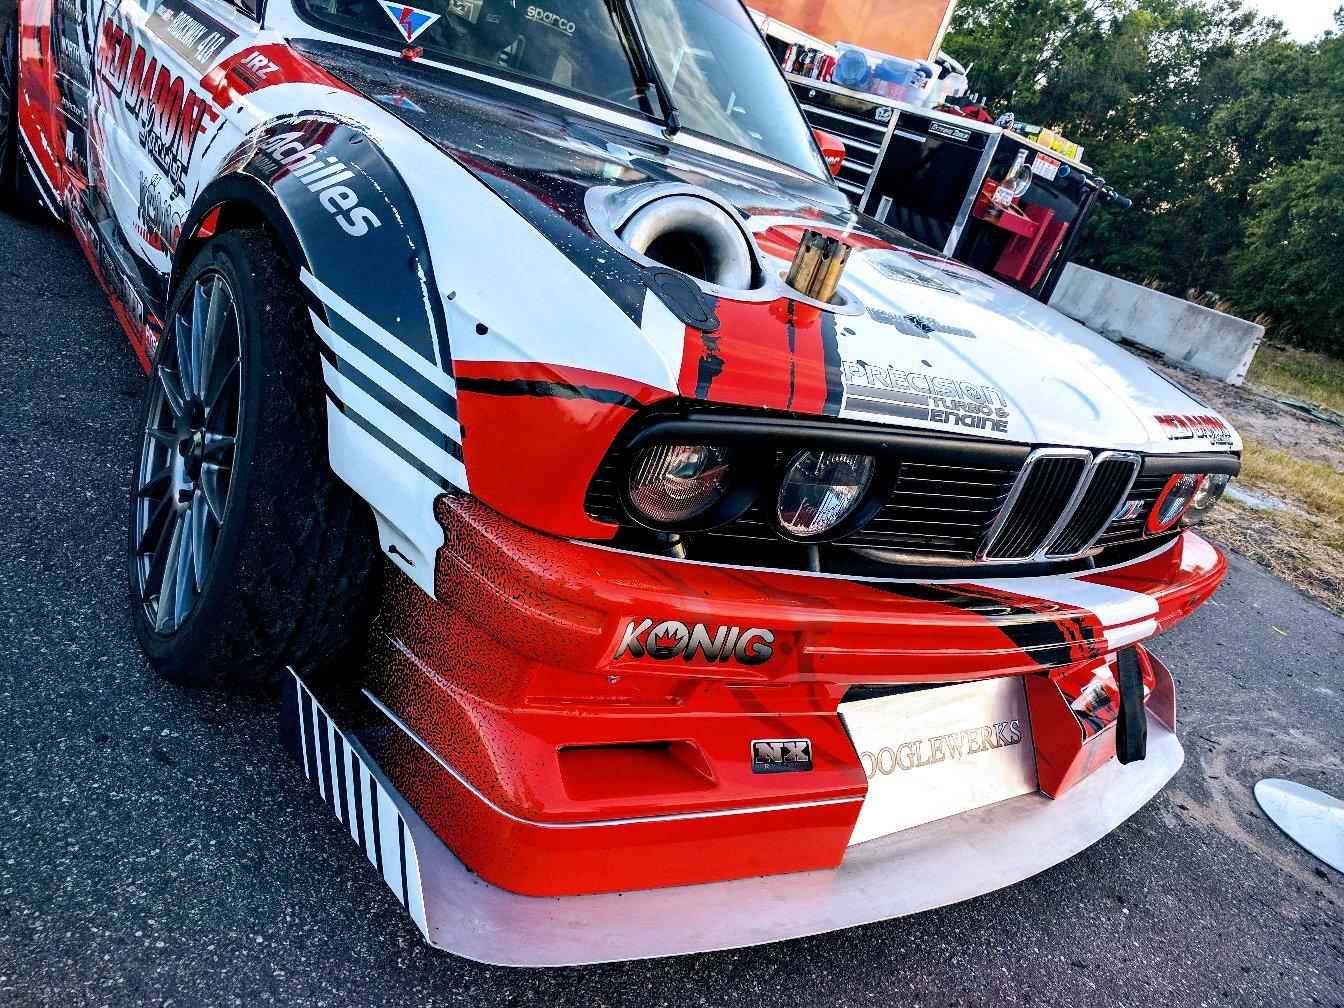 Some gorgeous E30 turbo drift car wallpaper from Formula Drift: Uncharted Territory